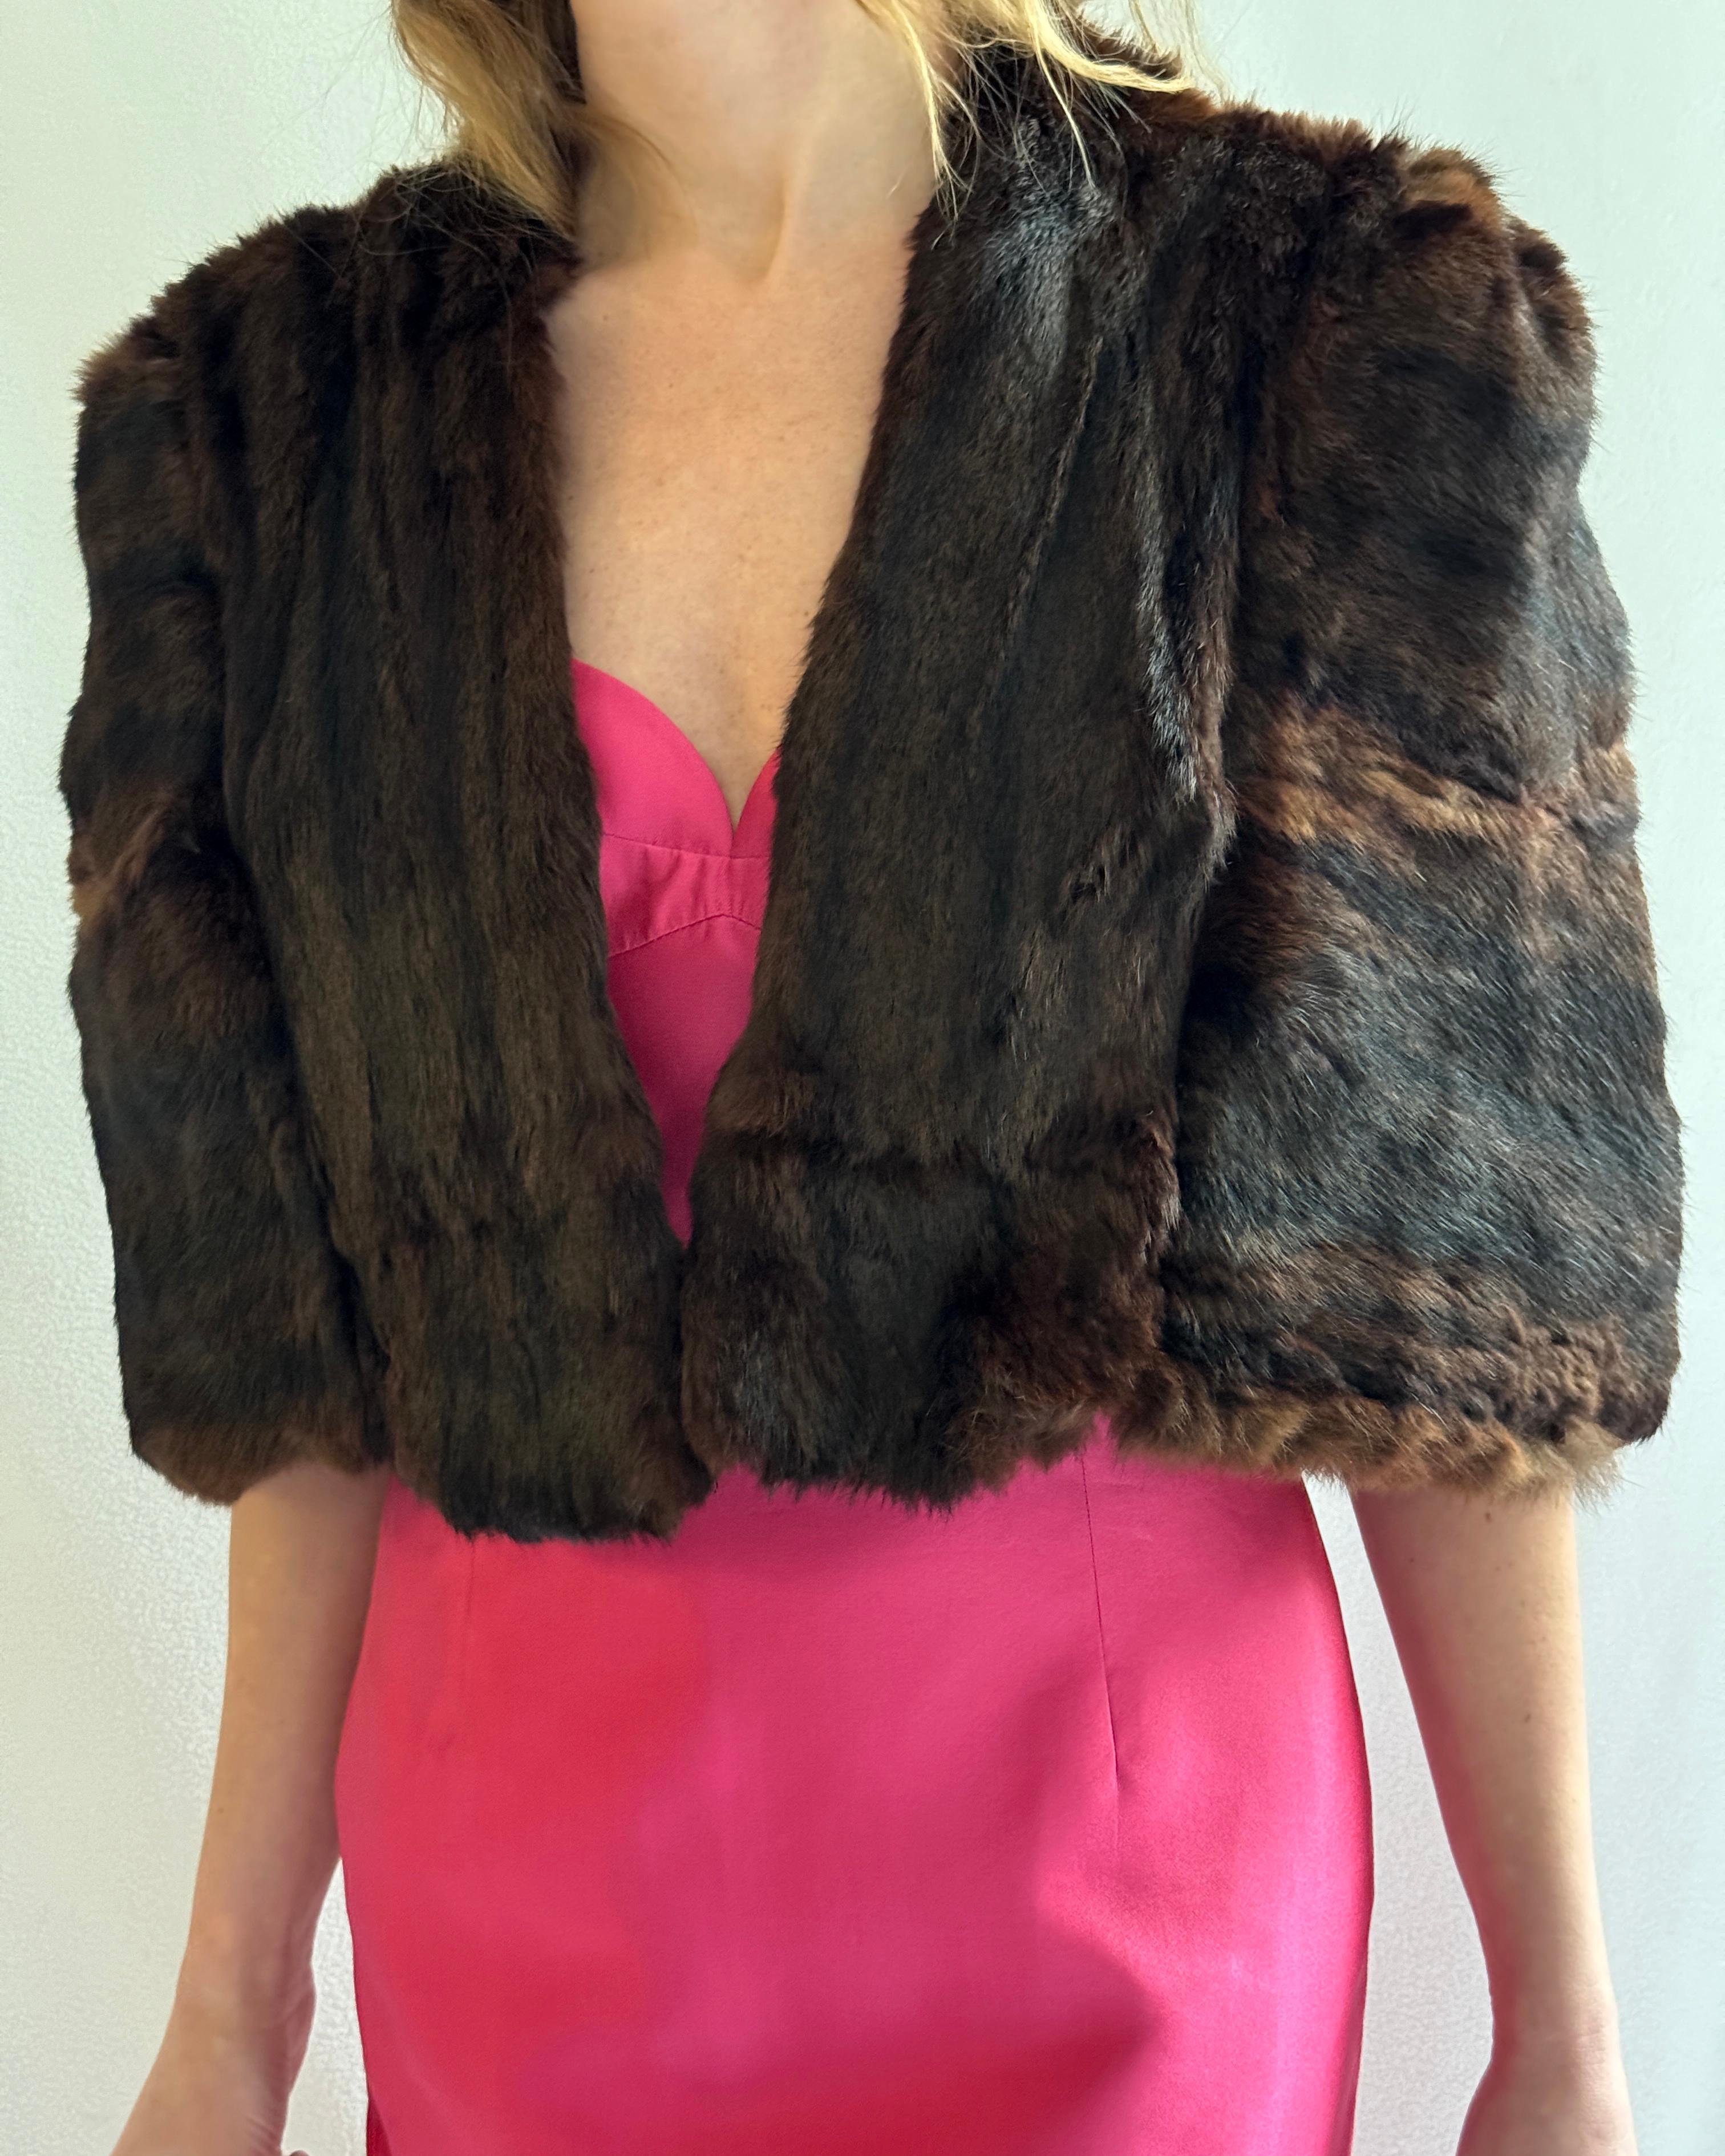 This is the ultimate vintage fur cape. Circa 1950s, its silhouette is simple enough but the construction is deceptively complex, creating the perfect shape. Although it's a cape and there are no sleeves, the way it's sculpted through the shoulders